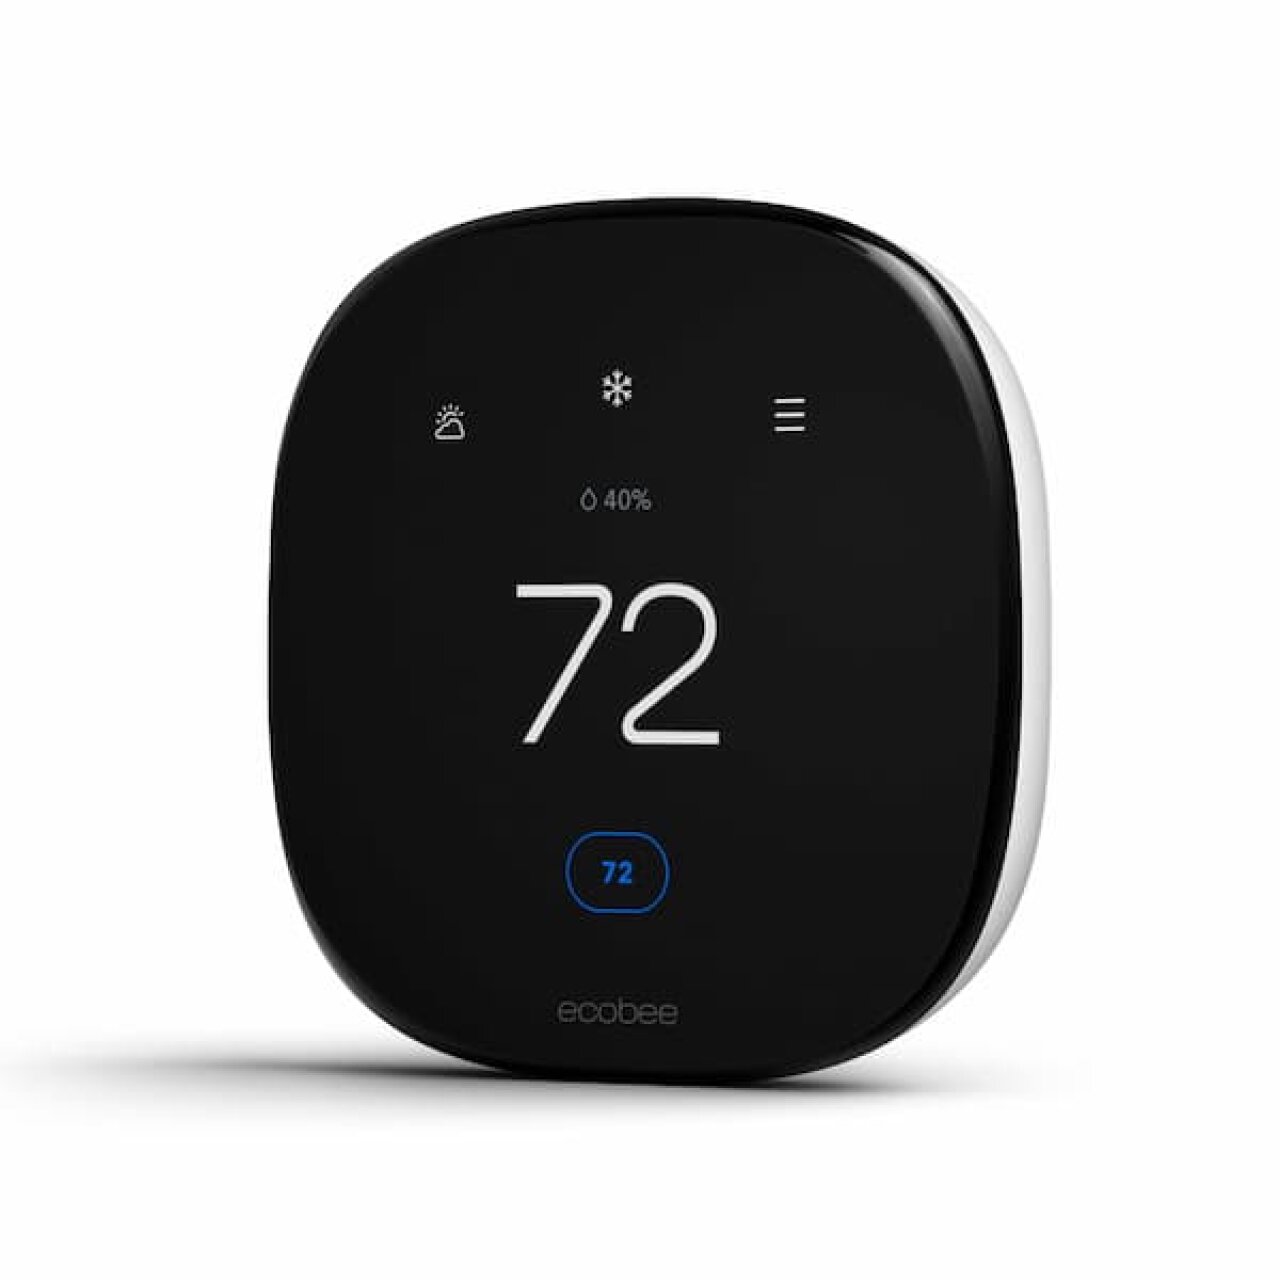 Ecobee Smart Thermostat with Voice Control.